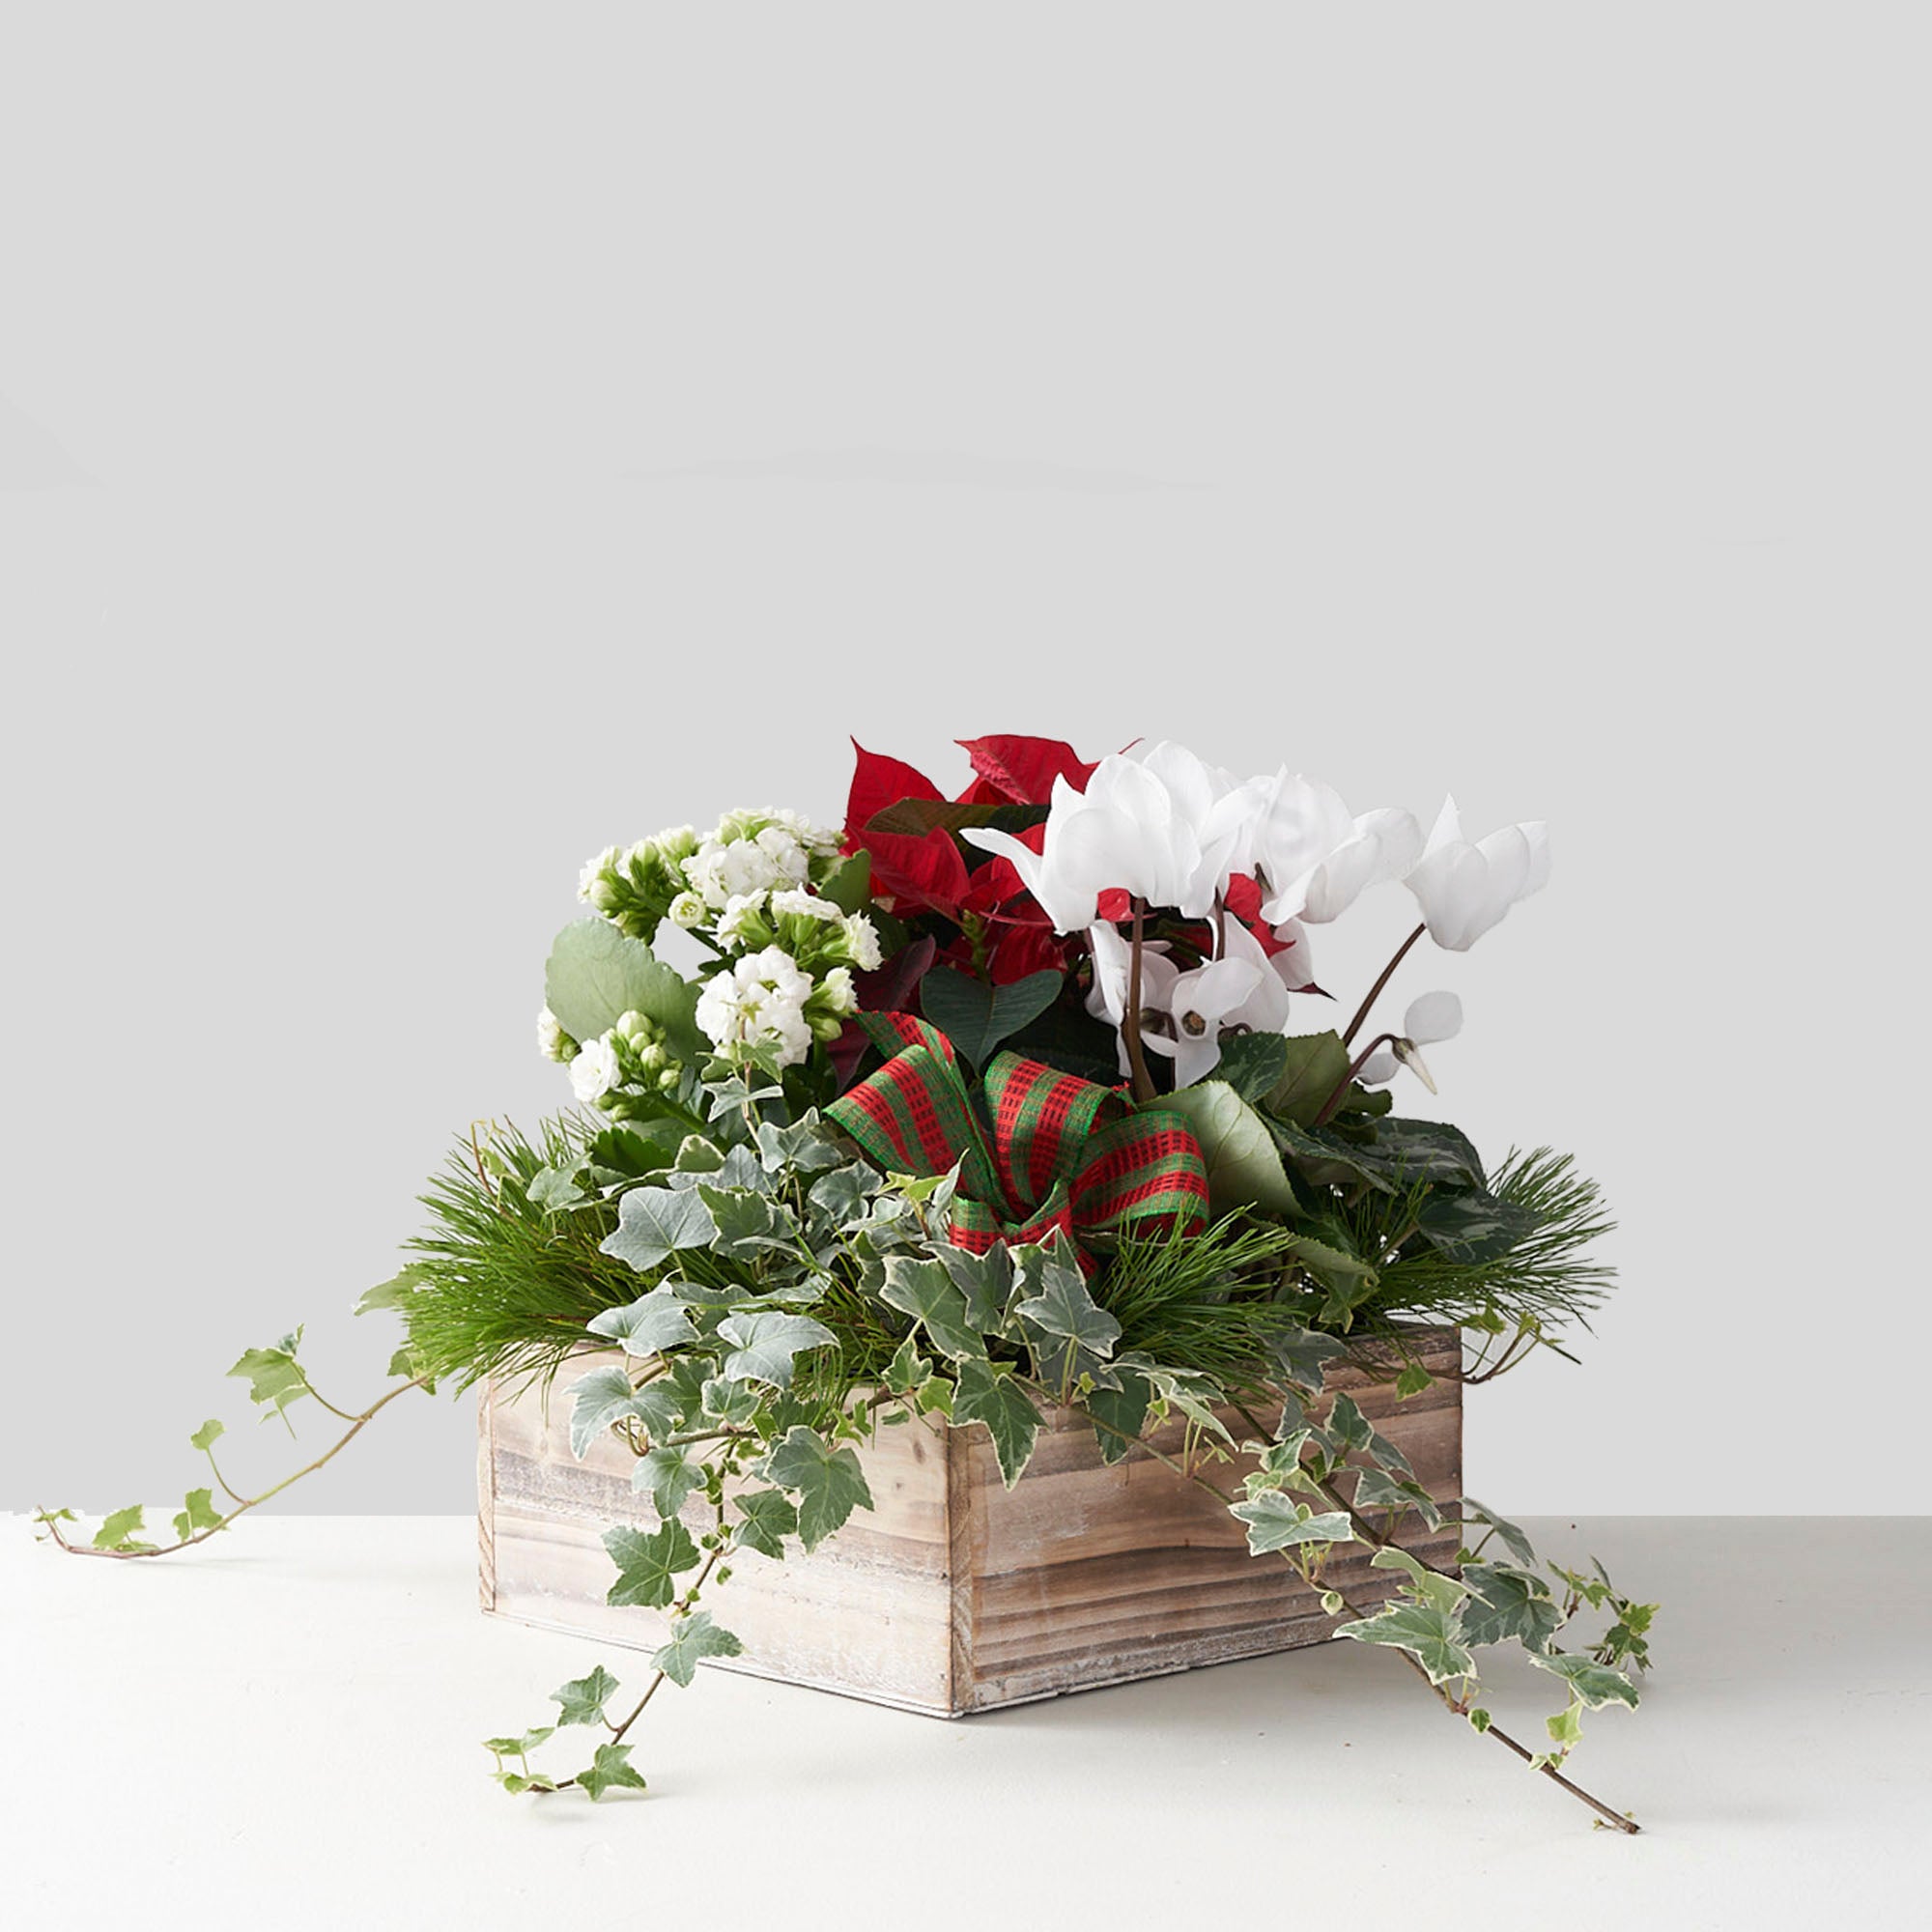 Mixed red and white plants in wooden box with pine boughs and red and green ribbon;